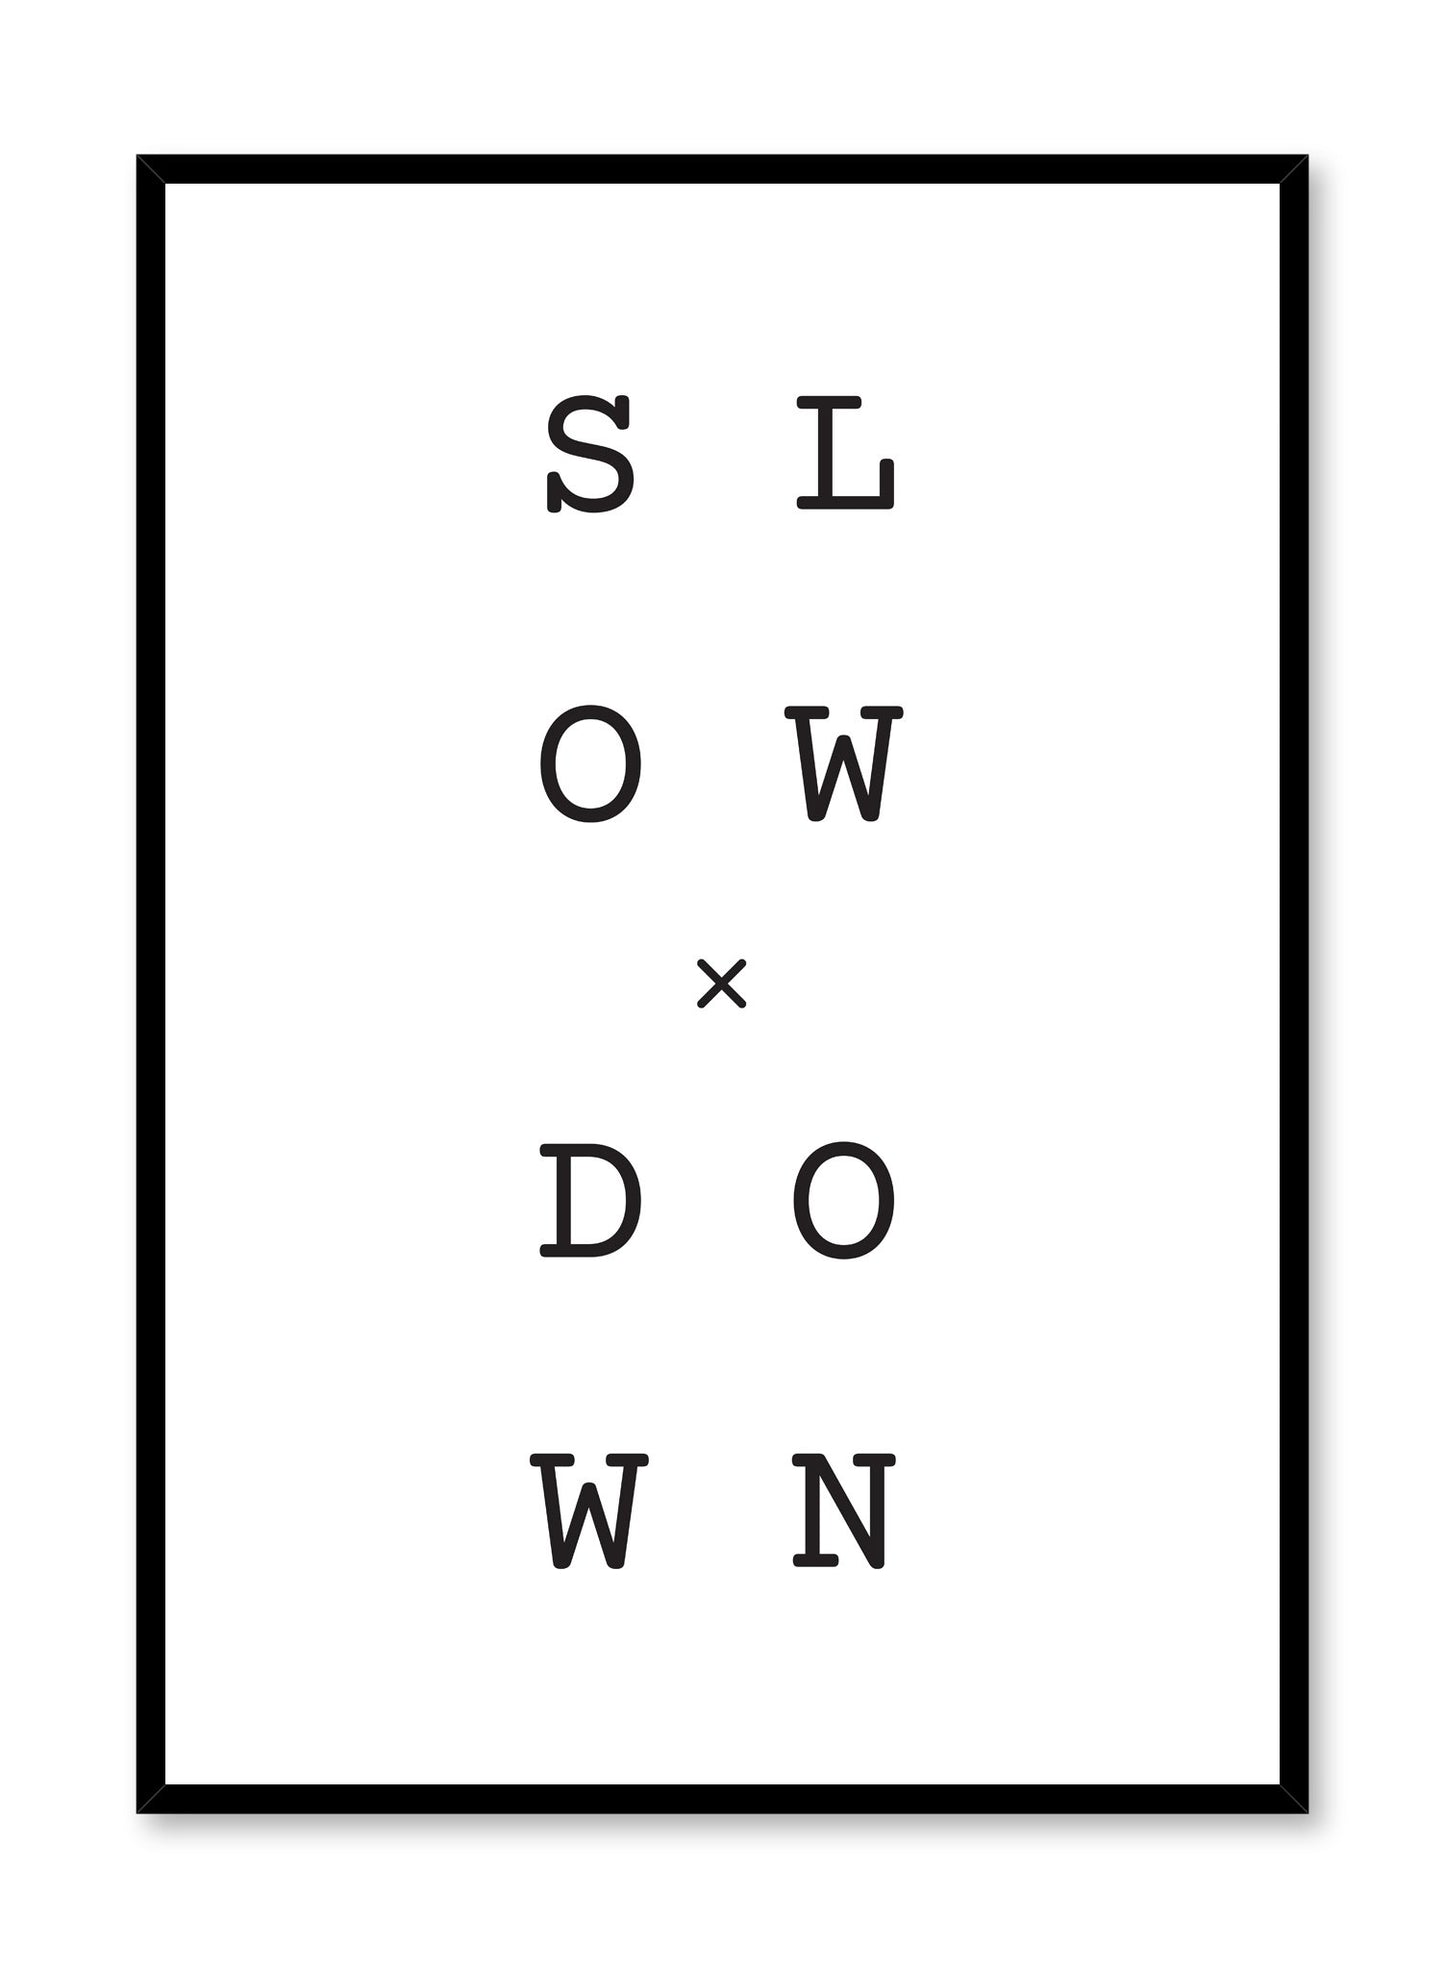 Modern minimalist poster by Opposite Wall with graphic typo Slow x Down design